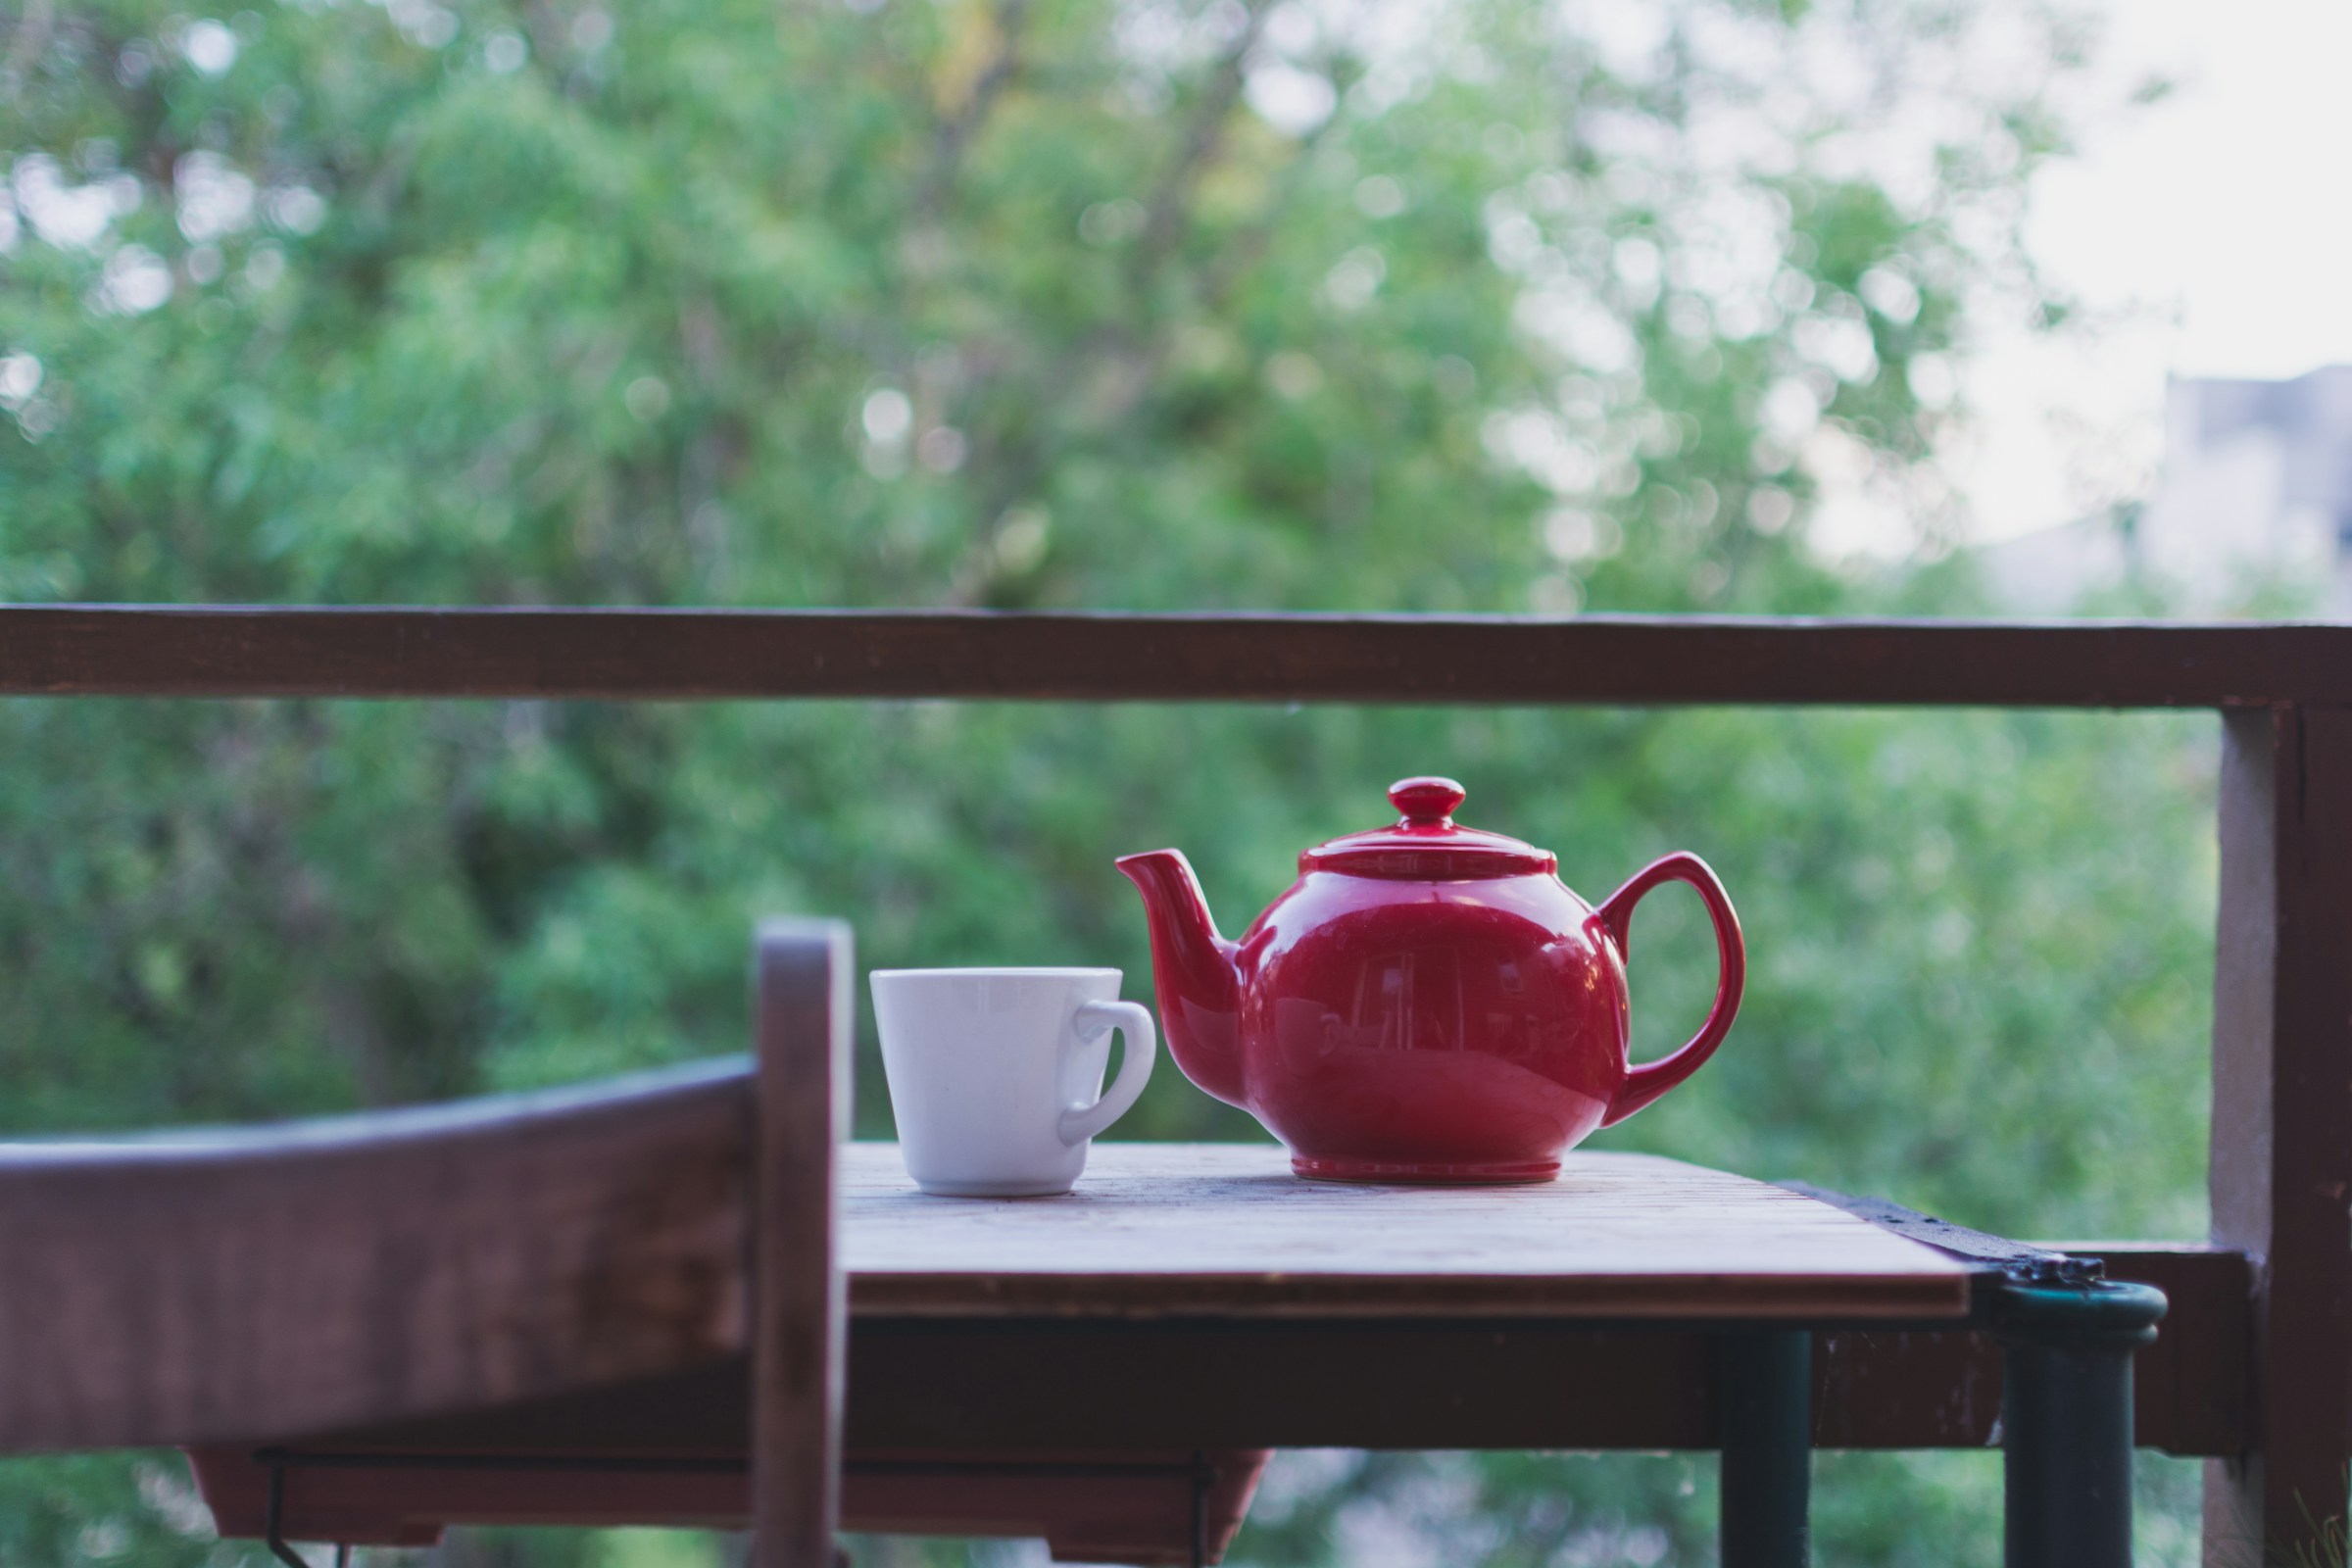 red teapot and white cup on wooden table outside with green trees in background